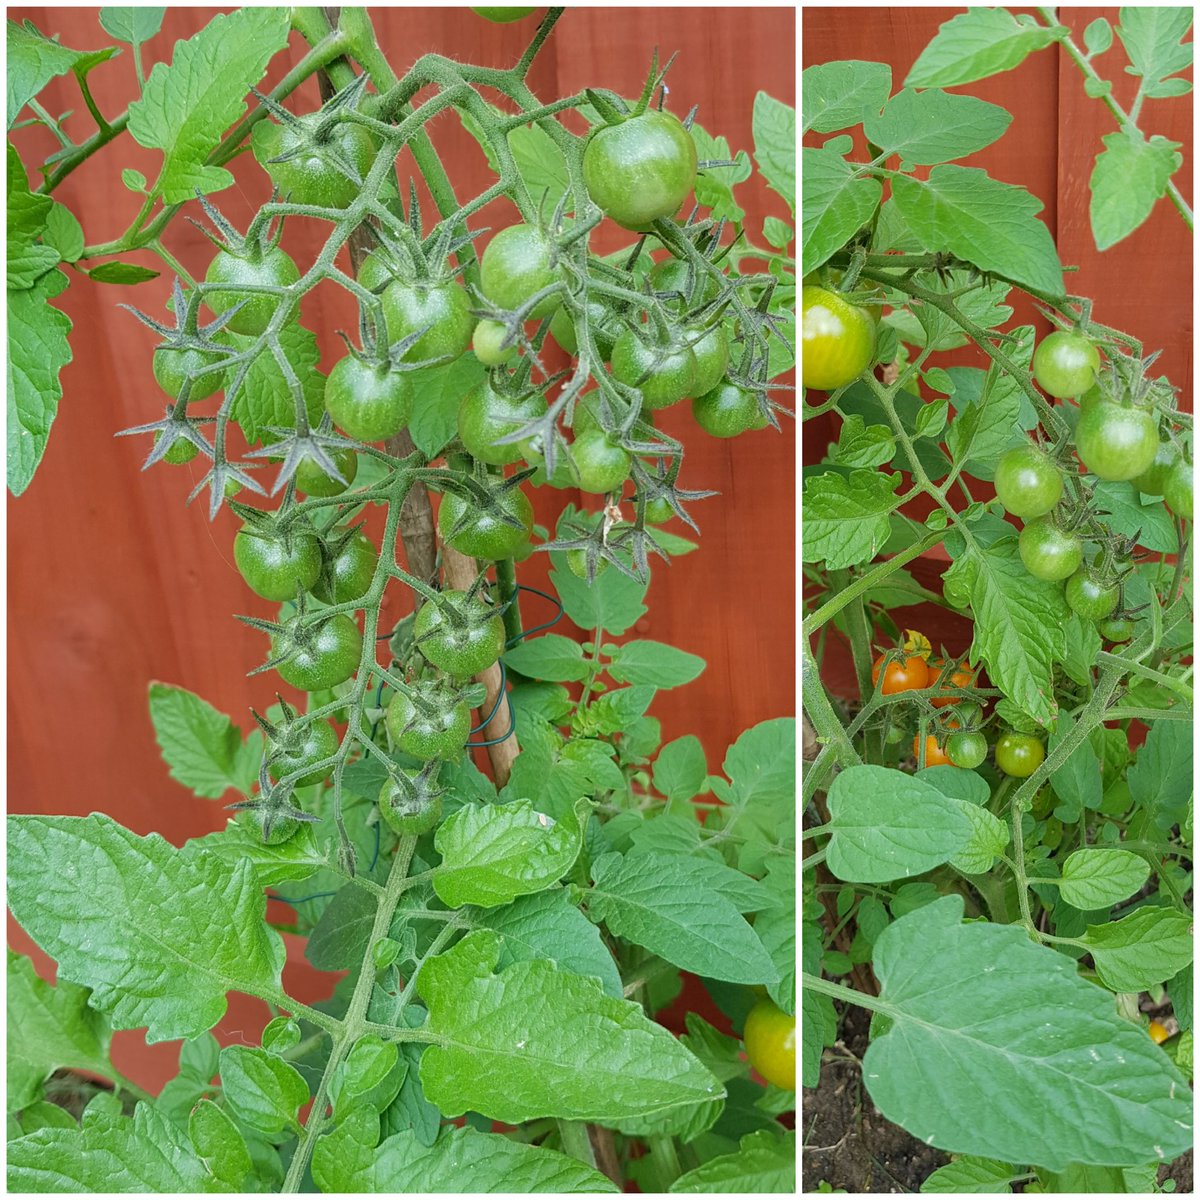 First time I've ever grown tomatoes and I'm pleased to report that they're still doing well! Looking forward to trying them when the time is right! 🍅😍 #growyourown #newtogrowyourown #sungoldtomatoes #newtogardening #progress #tomatoplants 🍅